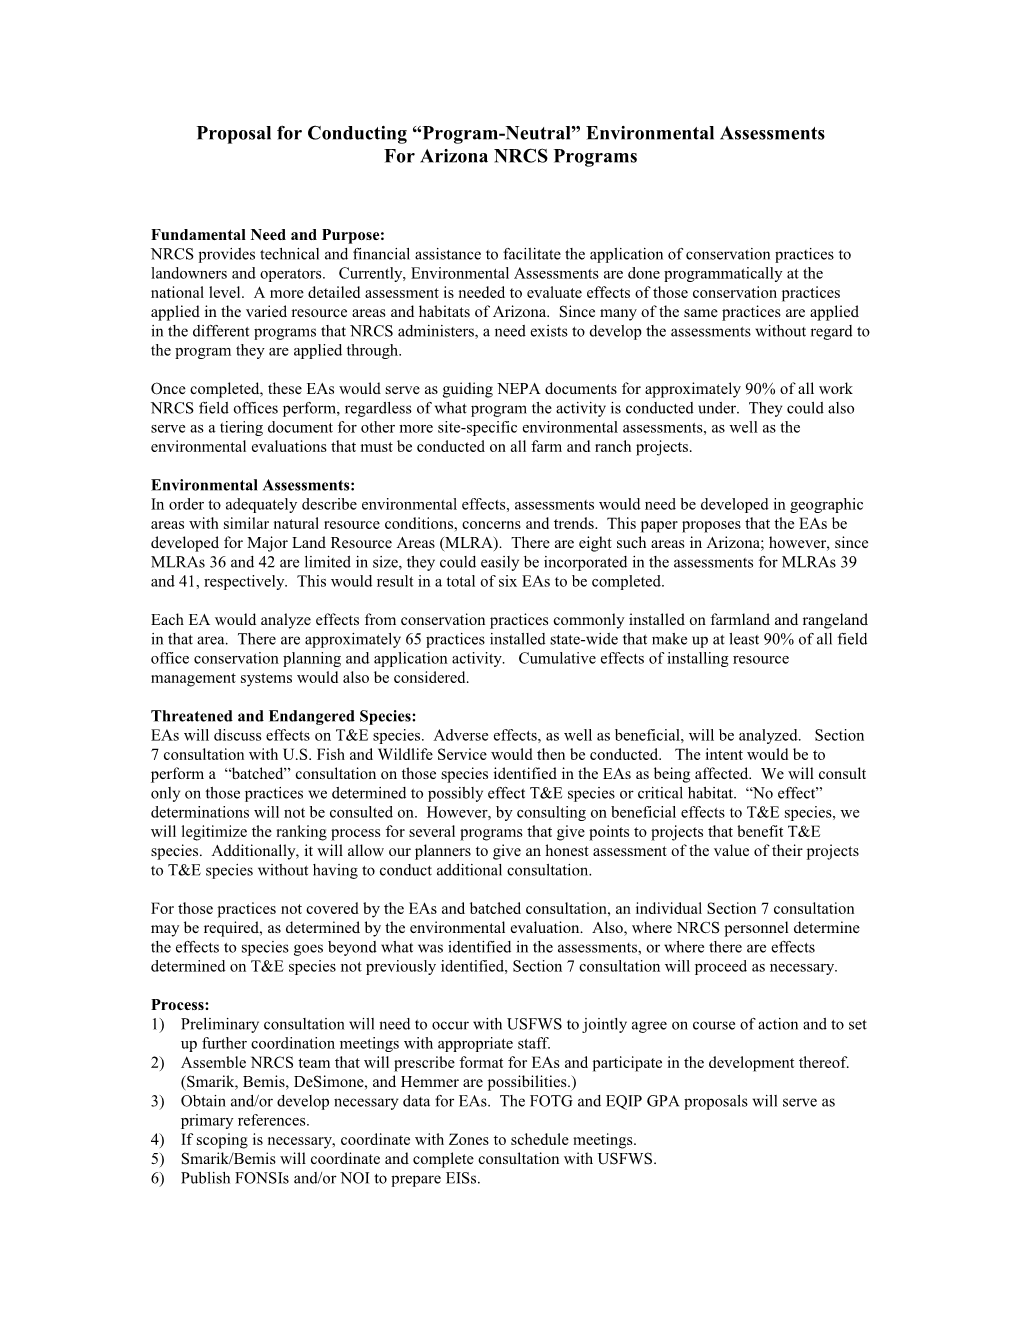 Proposal for Conducting Environmental Assessments